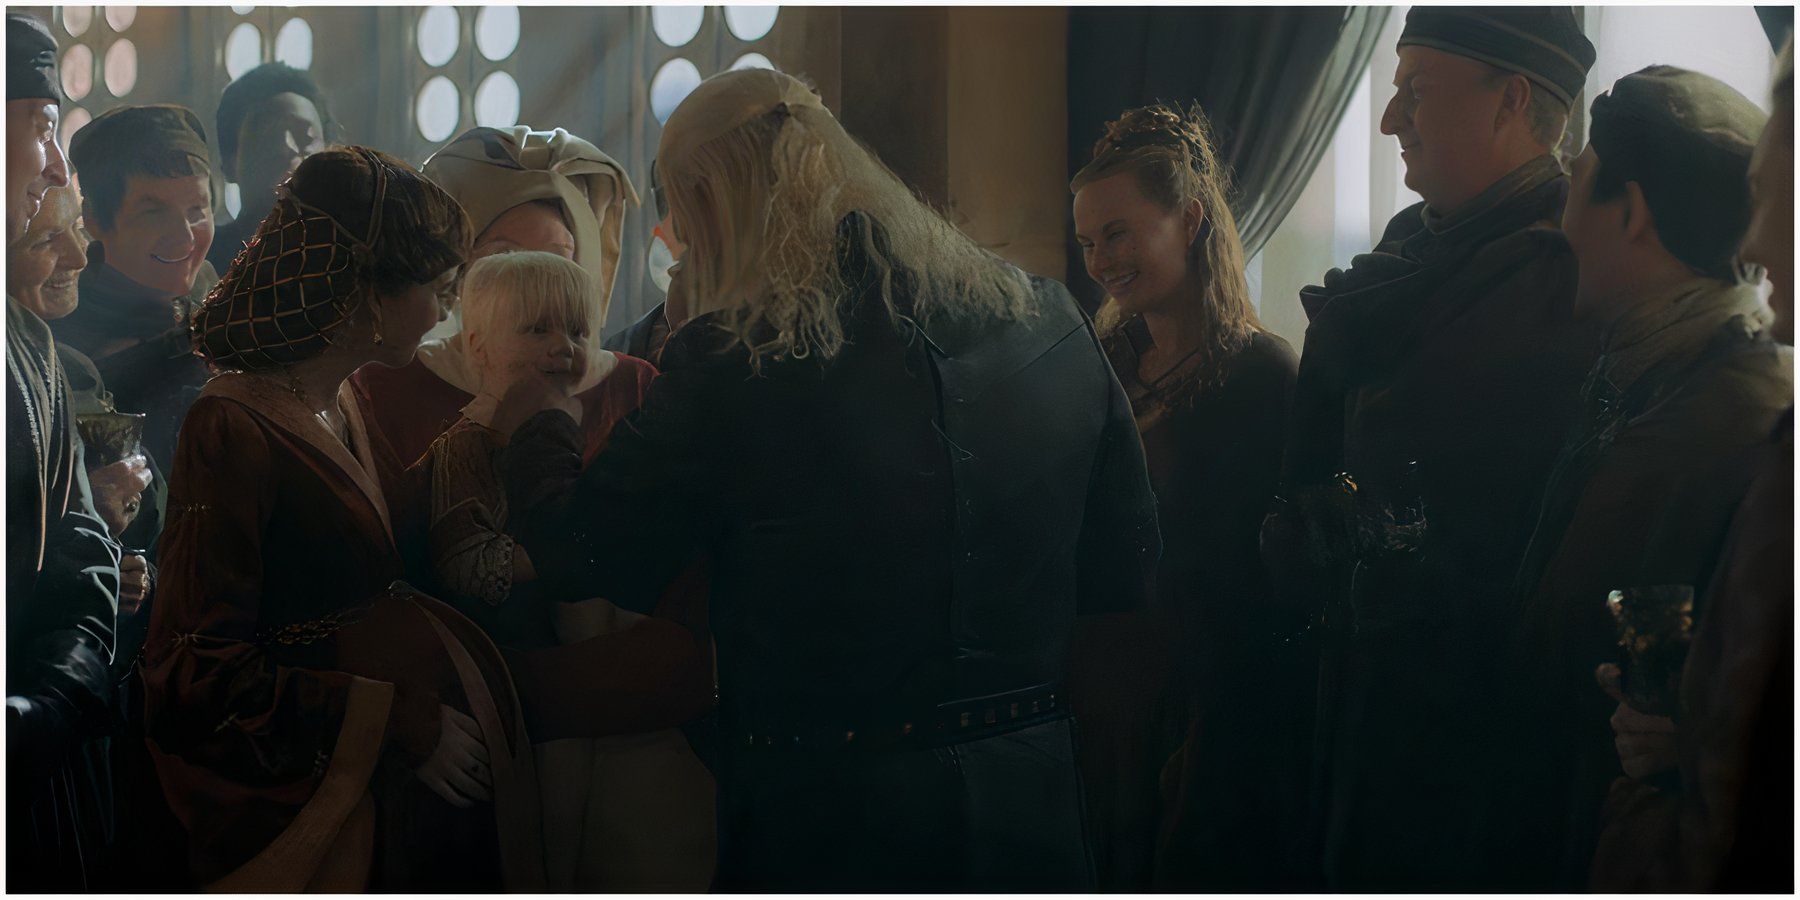 Alicent Hightower Prince Aegon and Viserys Targaryen in House of the Dragon.